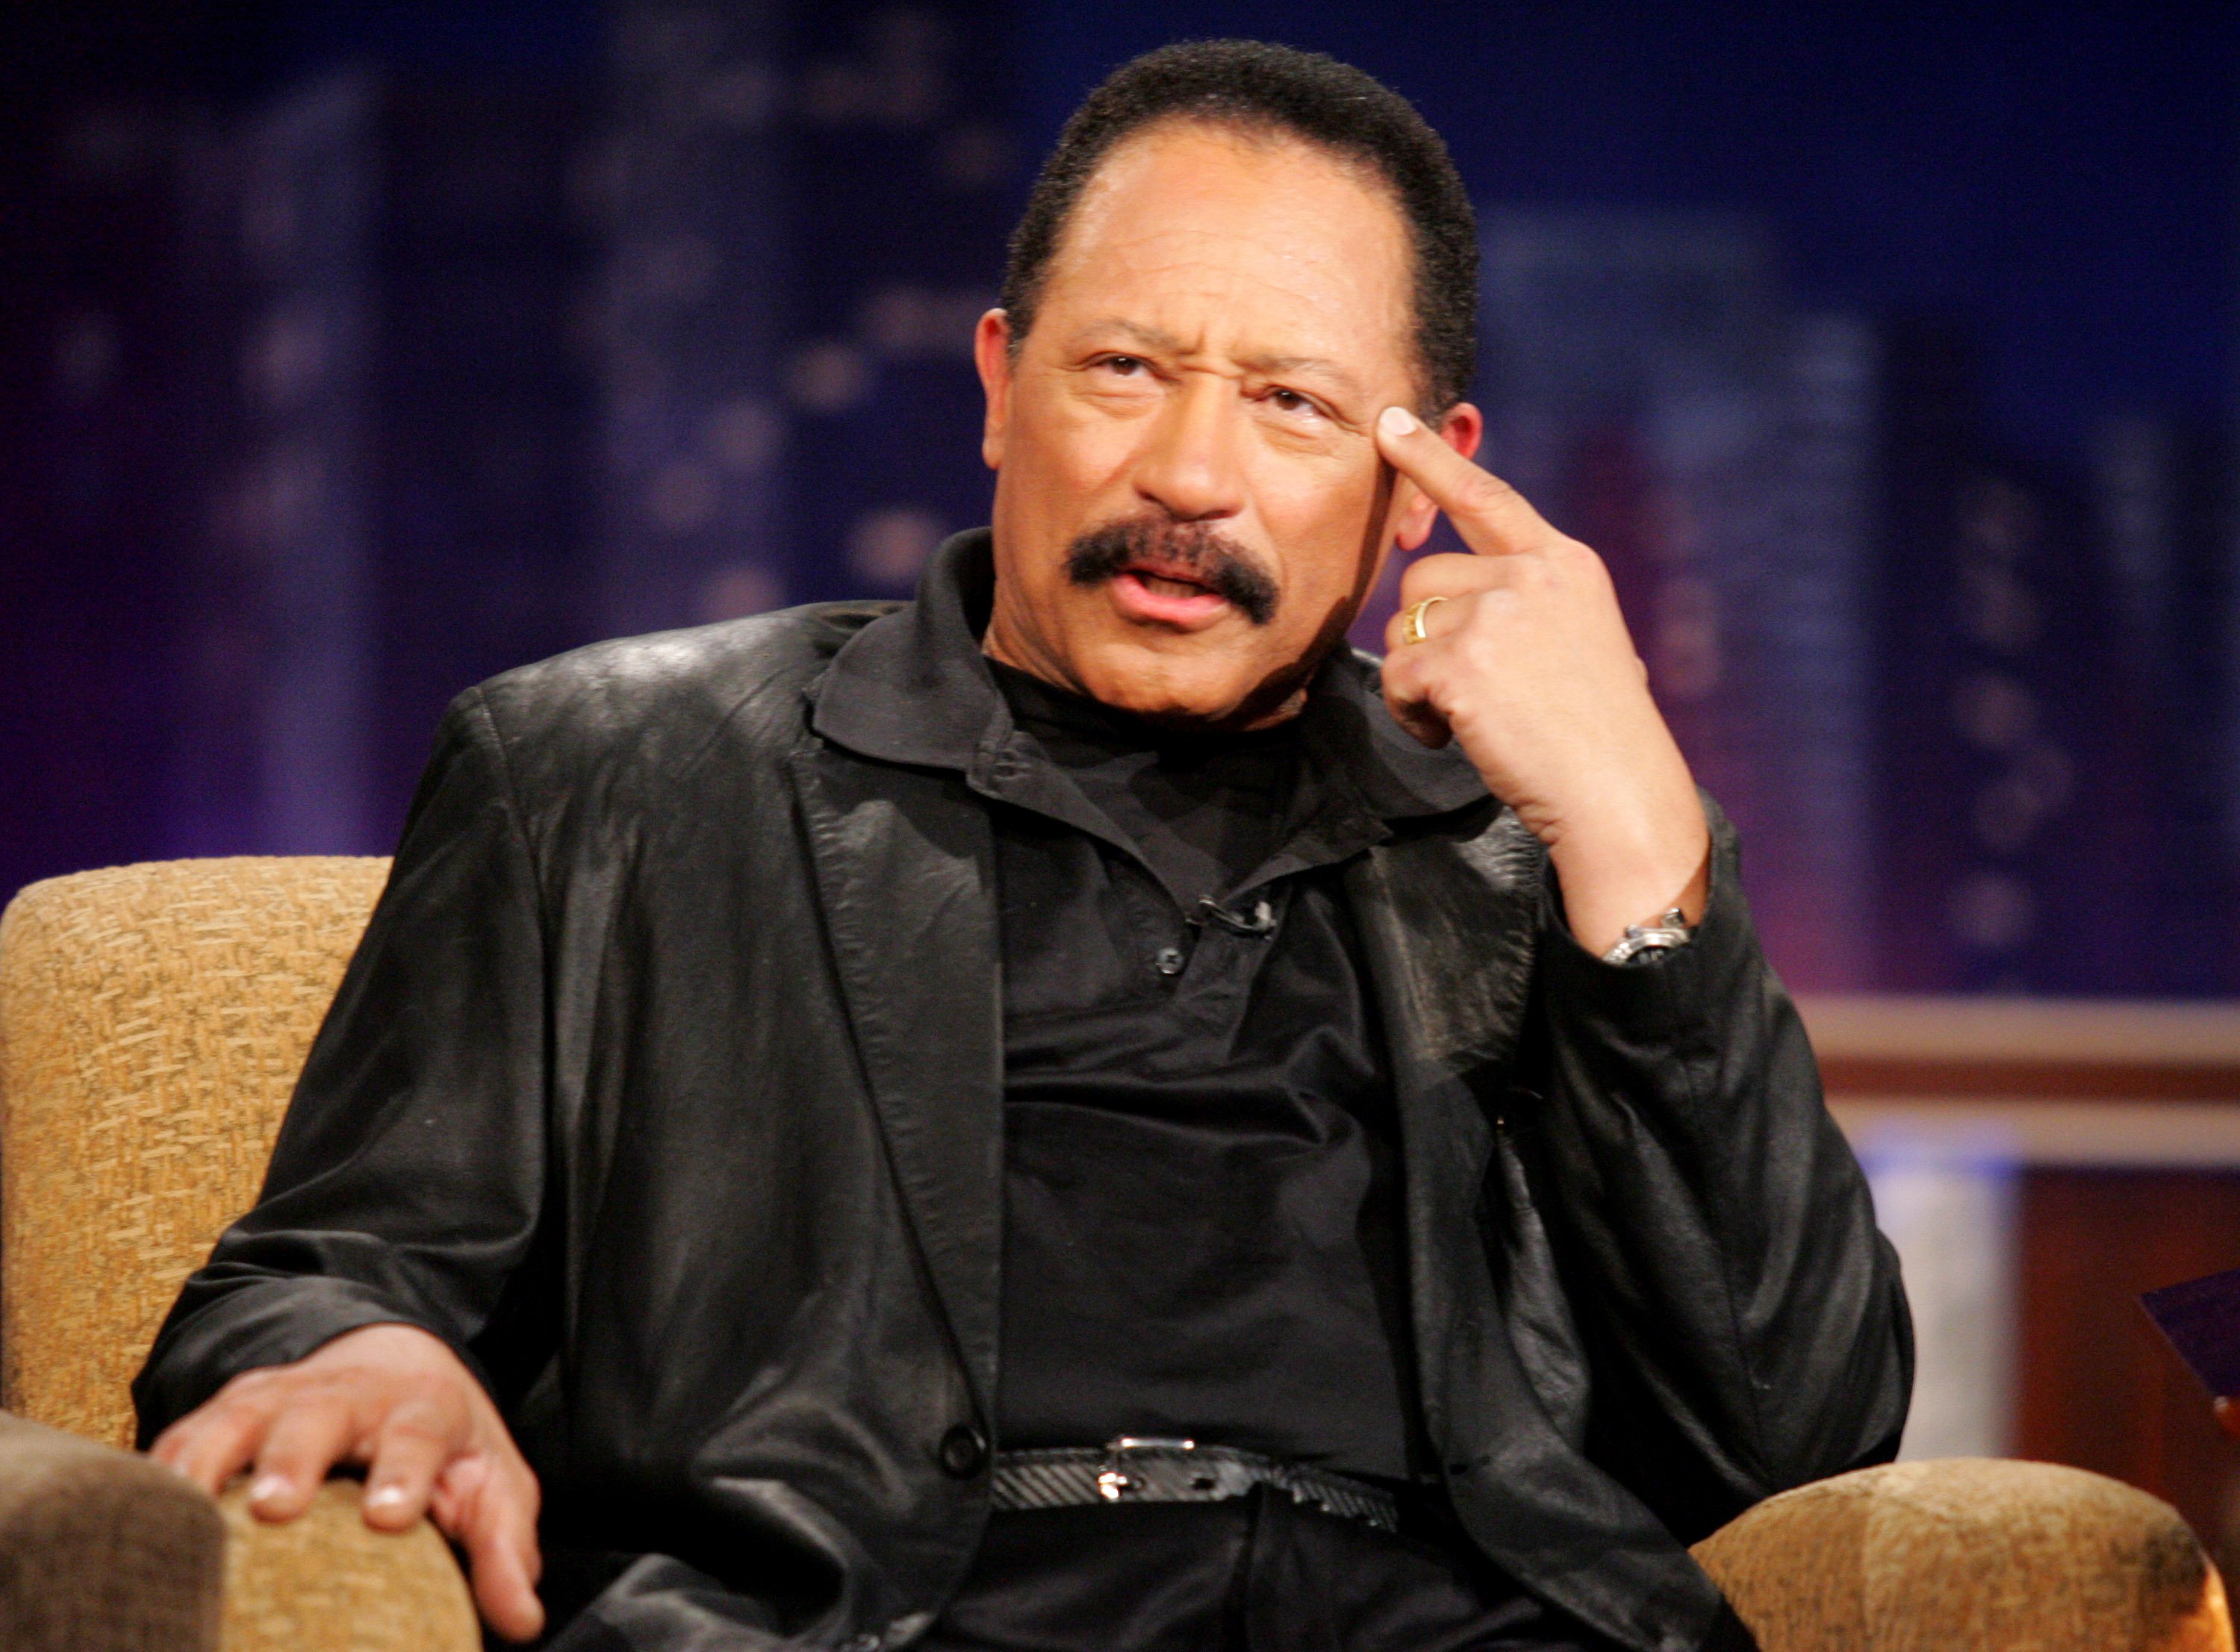 Judge Joe Brown on the "Jimmy Kimmel Live" show on ABC on May 23, 2005. | Photo: Getty Images